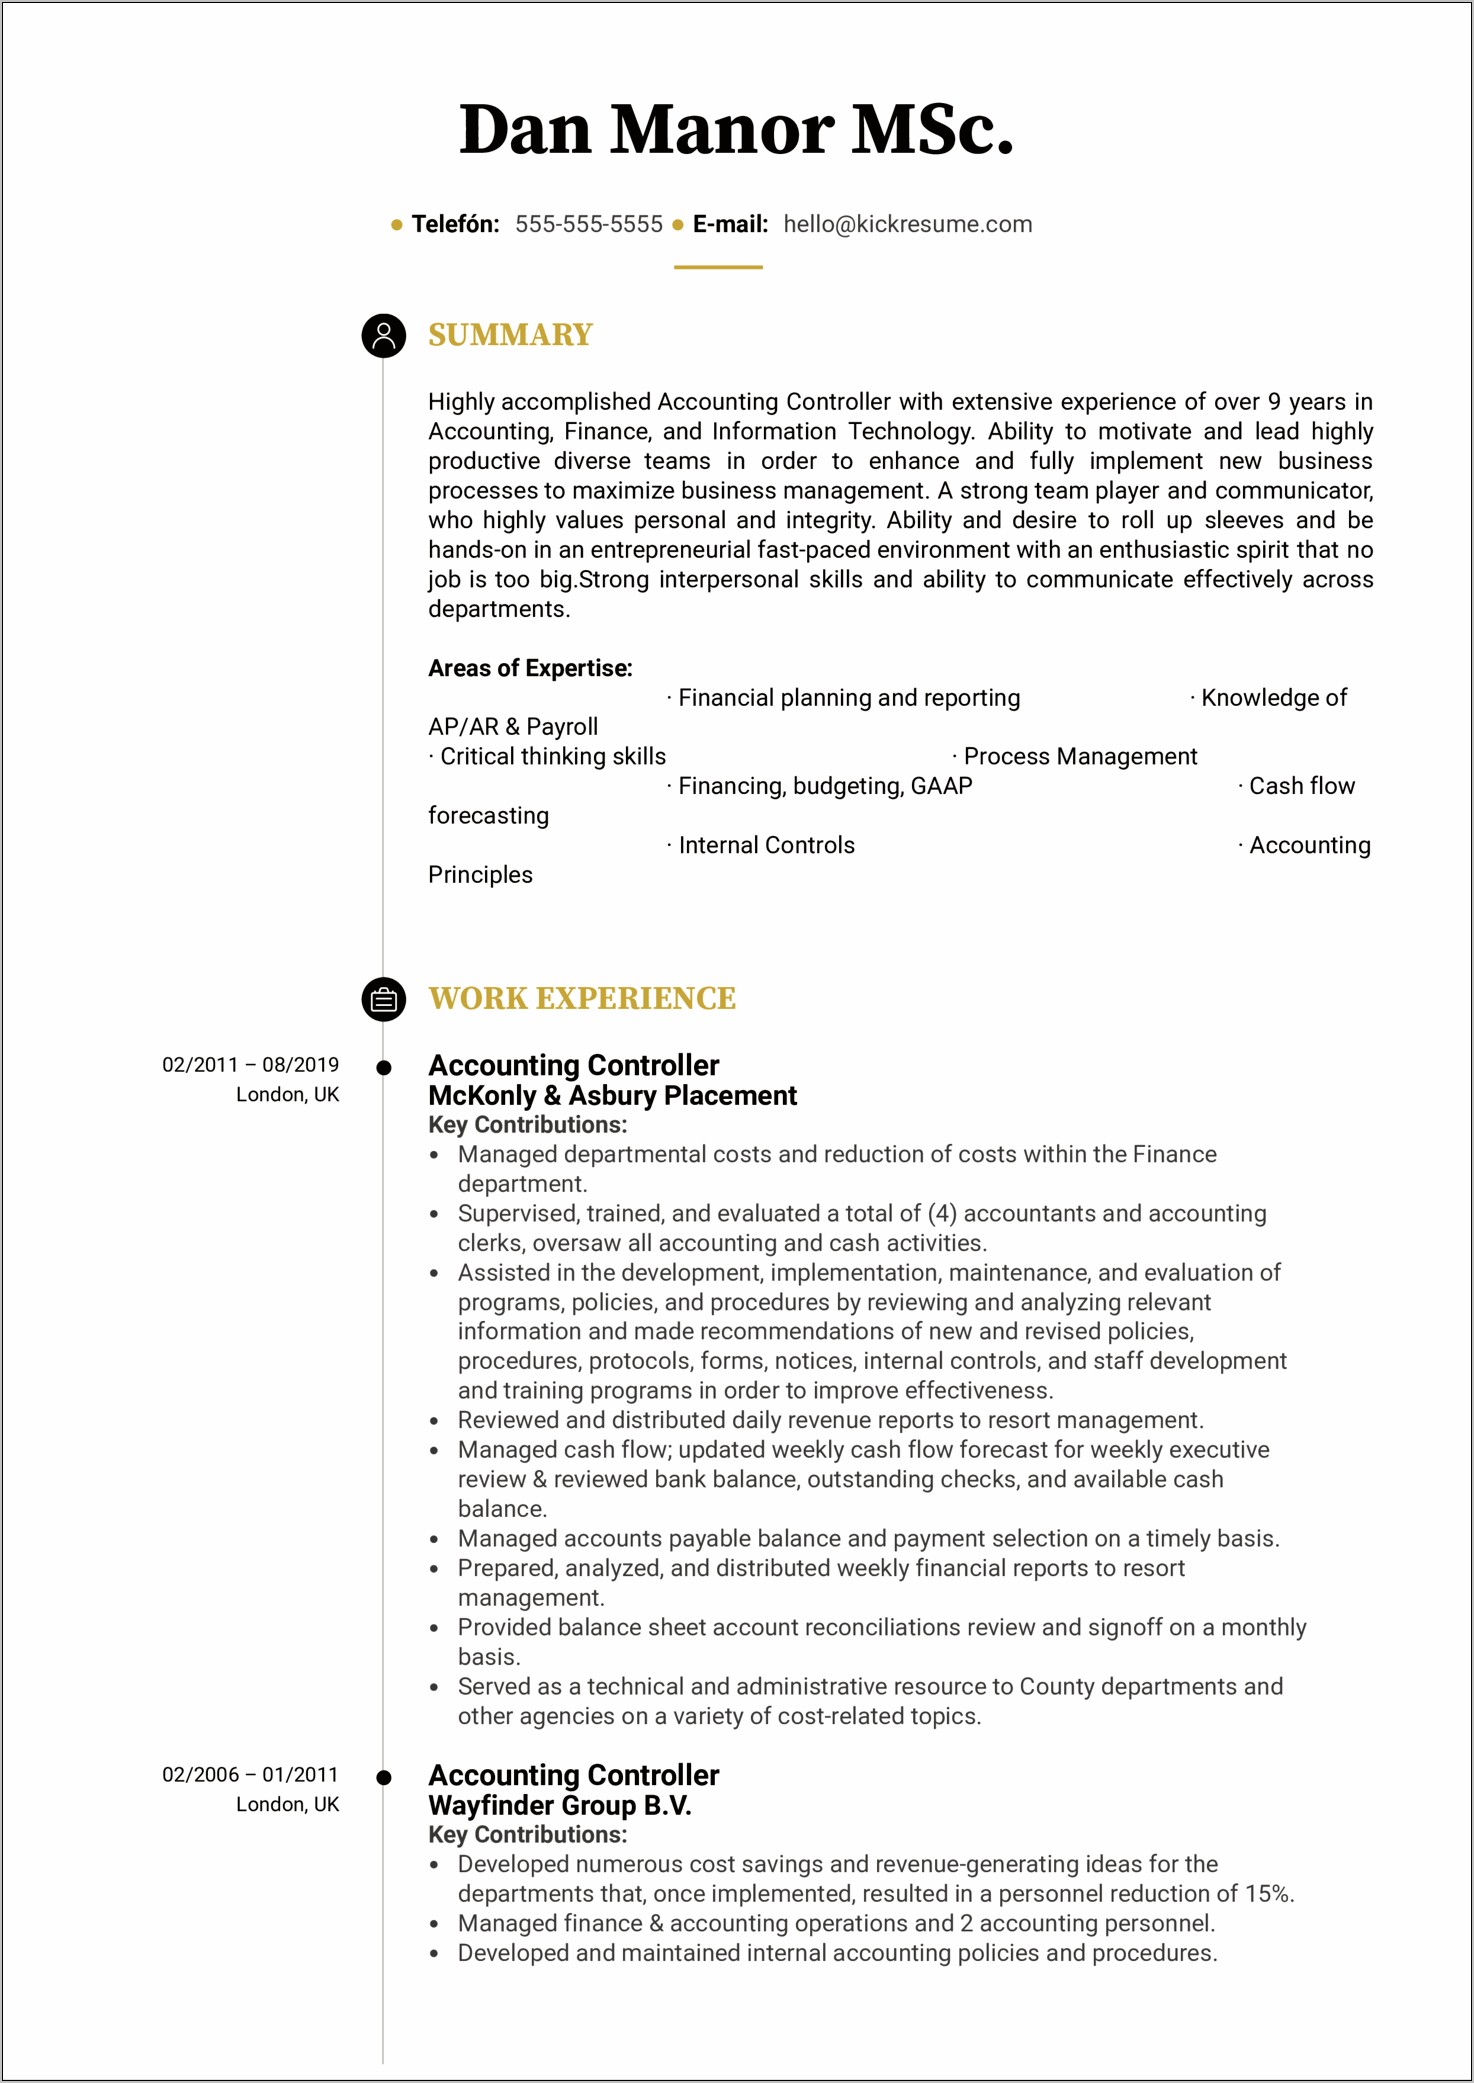 Professional Summary For Financial Controllership Manager Resume